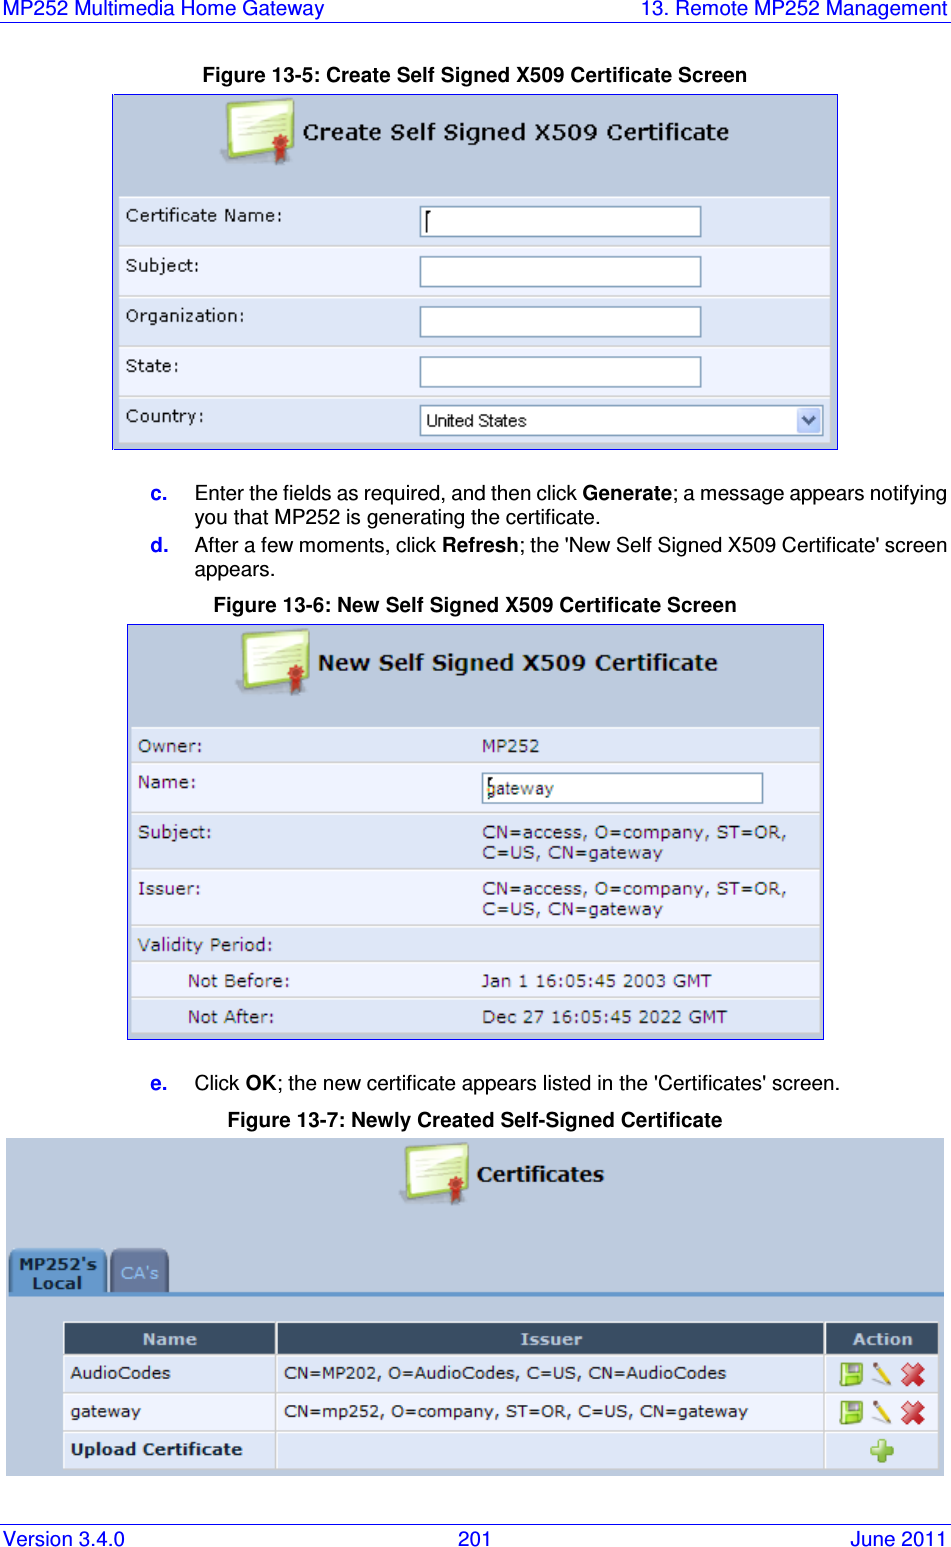 MP252 Multimedia Home Gateway  13. Remote MP252 Management Version 3.4.0  201  June 2011 Figure 13-5: Create Self Signed X509 Certificate Screen  c.  Enter the fields as required, and then click Generate; a message appears notifying you that MP252 is generating the certificate. d.  After a few moments, click Refresh; the &apos;New Self Signed X509 Certificate&apos; screen appears. Figure 13-6: New Self Signed X509 Certificate Screen  e.  Click OK; the new certificate appears listed in the &apos;Certificates&apos; screen. Figure 13-7: Newly Created Self-Signed Certificate  